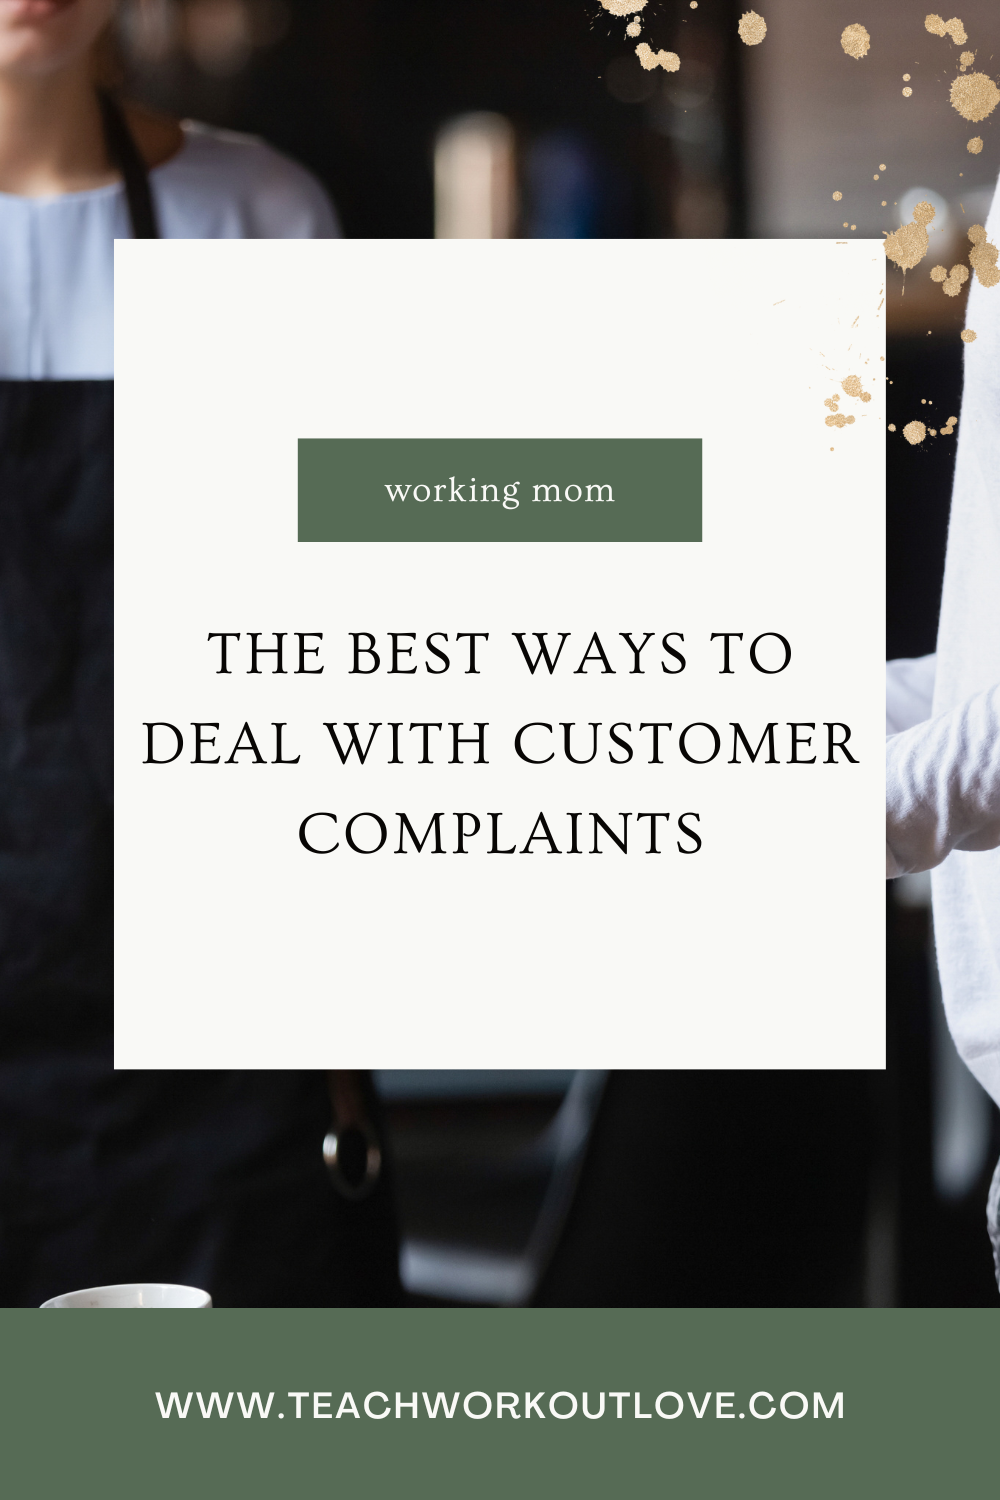 In this post, we are going to discuss this in some detail. By the end, you will have a much stronger sense of why complaints happen, what the best approach to take with them generally is, and how you can make sure that you are going to avoid them even cropping up as often in the future. So let’s take a look at some of the main things you’ll want to bear in mind when it comes to those concerns.